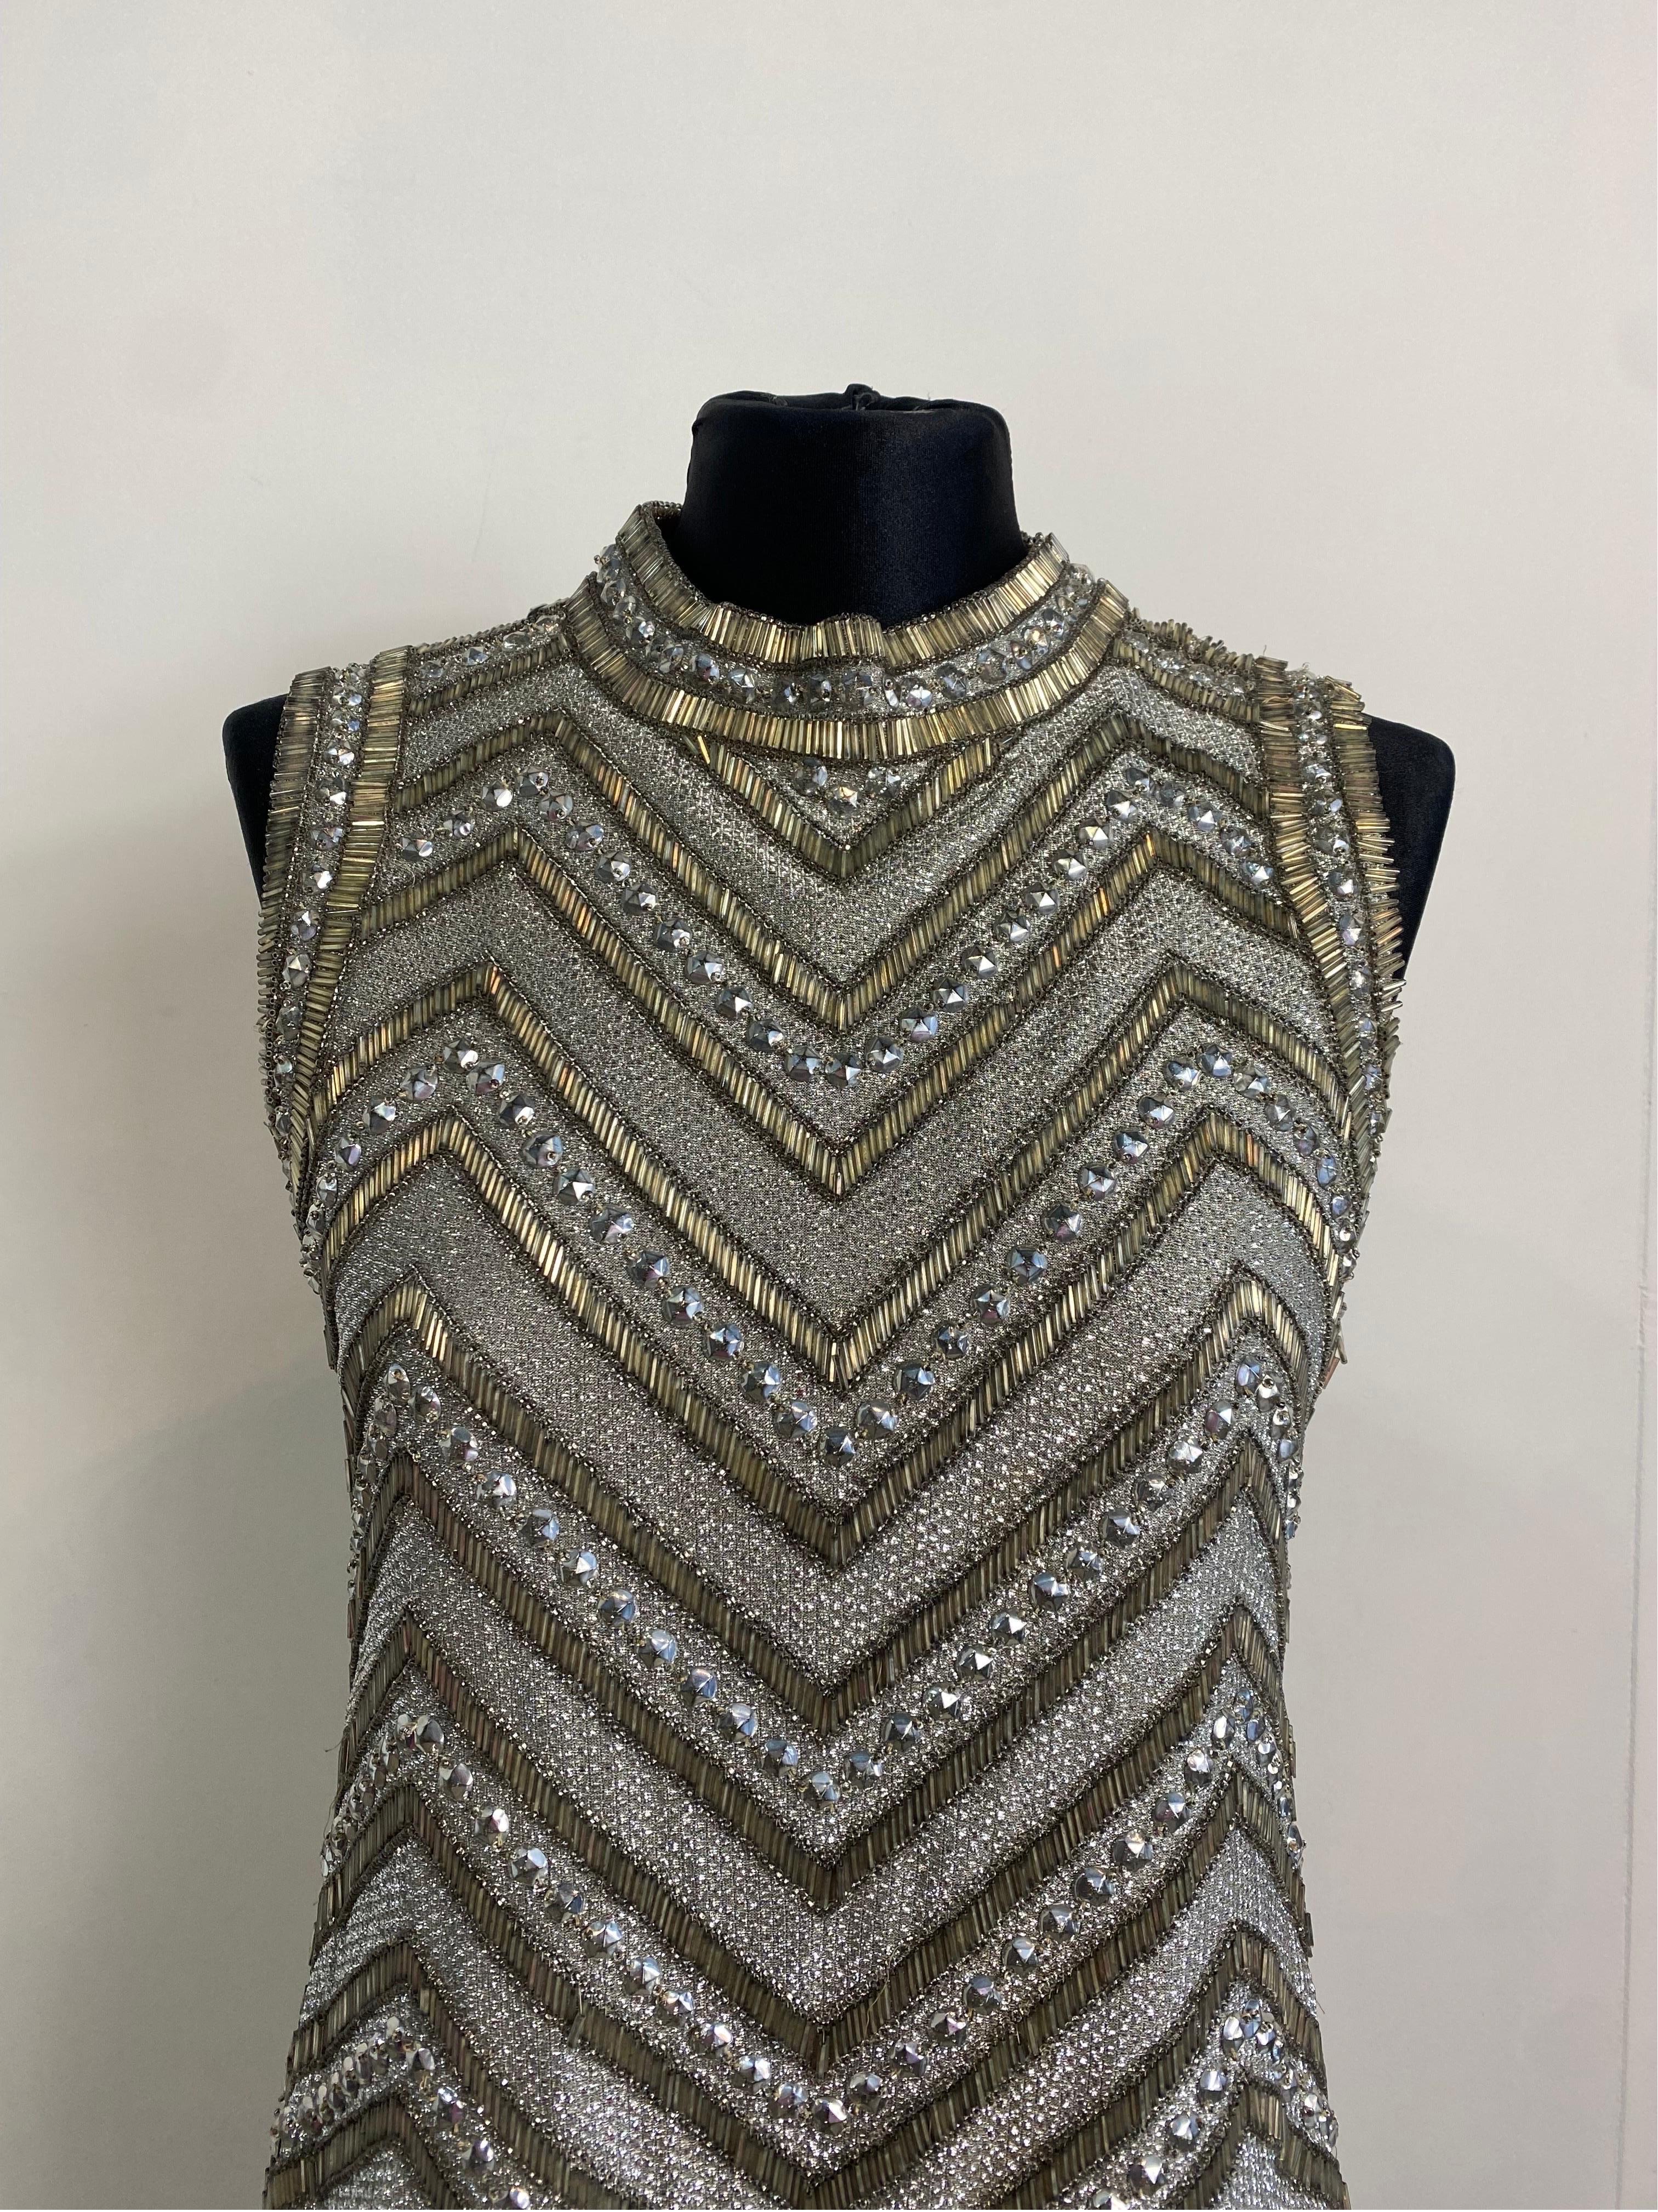 Mila Schon jewelry dress.
Vintage piece. 60s.
In silk. Lined.
Embroidered with wonderful sequins and silver beads.
Lurex details.
Size and composition label missing.
Wears an international S.
Shoulders 32 cm
Bust 42 cm
Length 90 cm
Good general